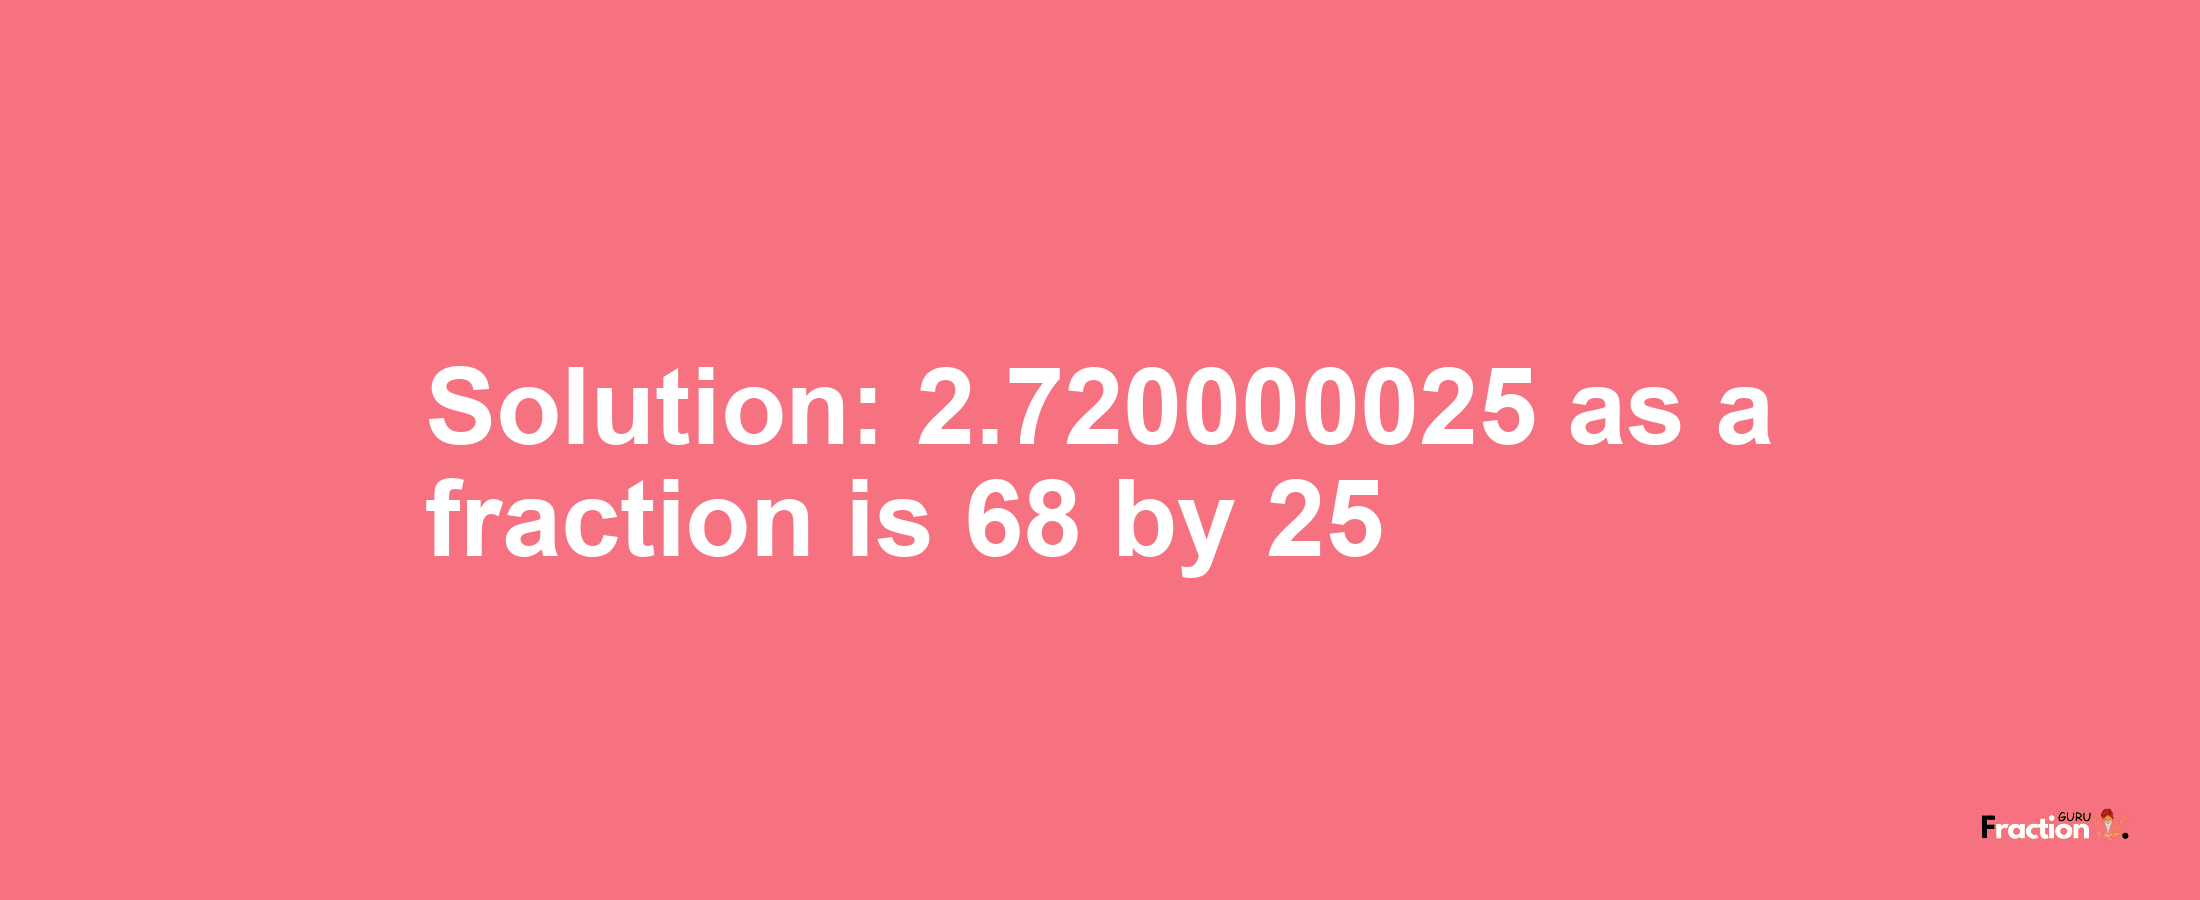 Solution:2.720000025 as a fraction is 68/25